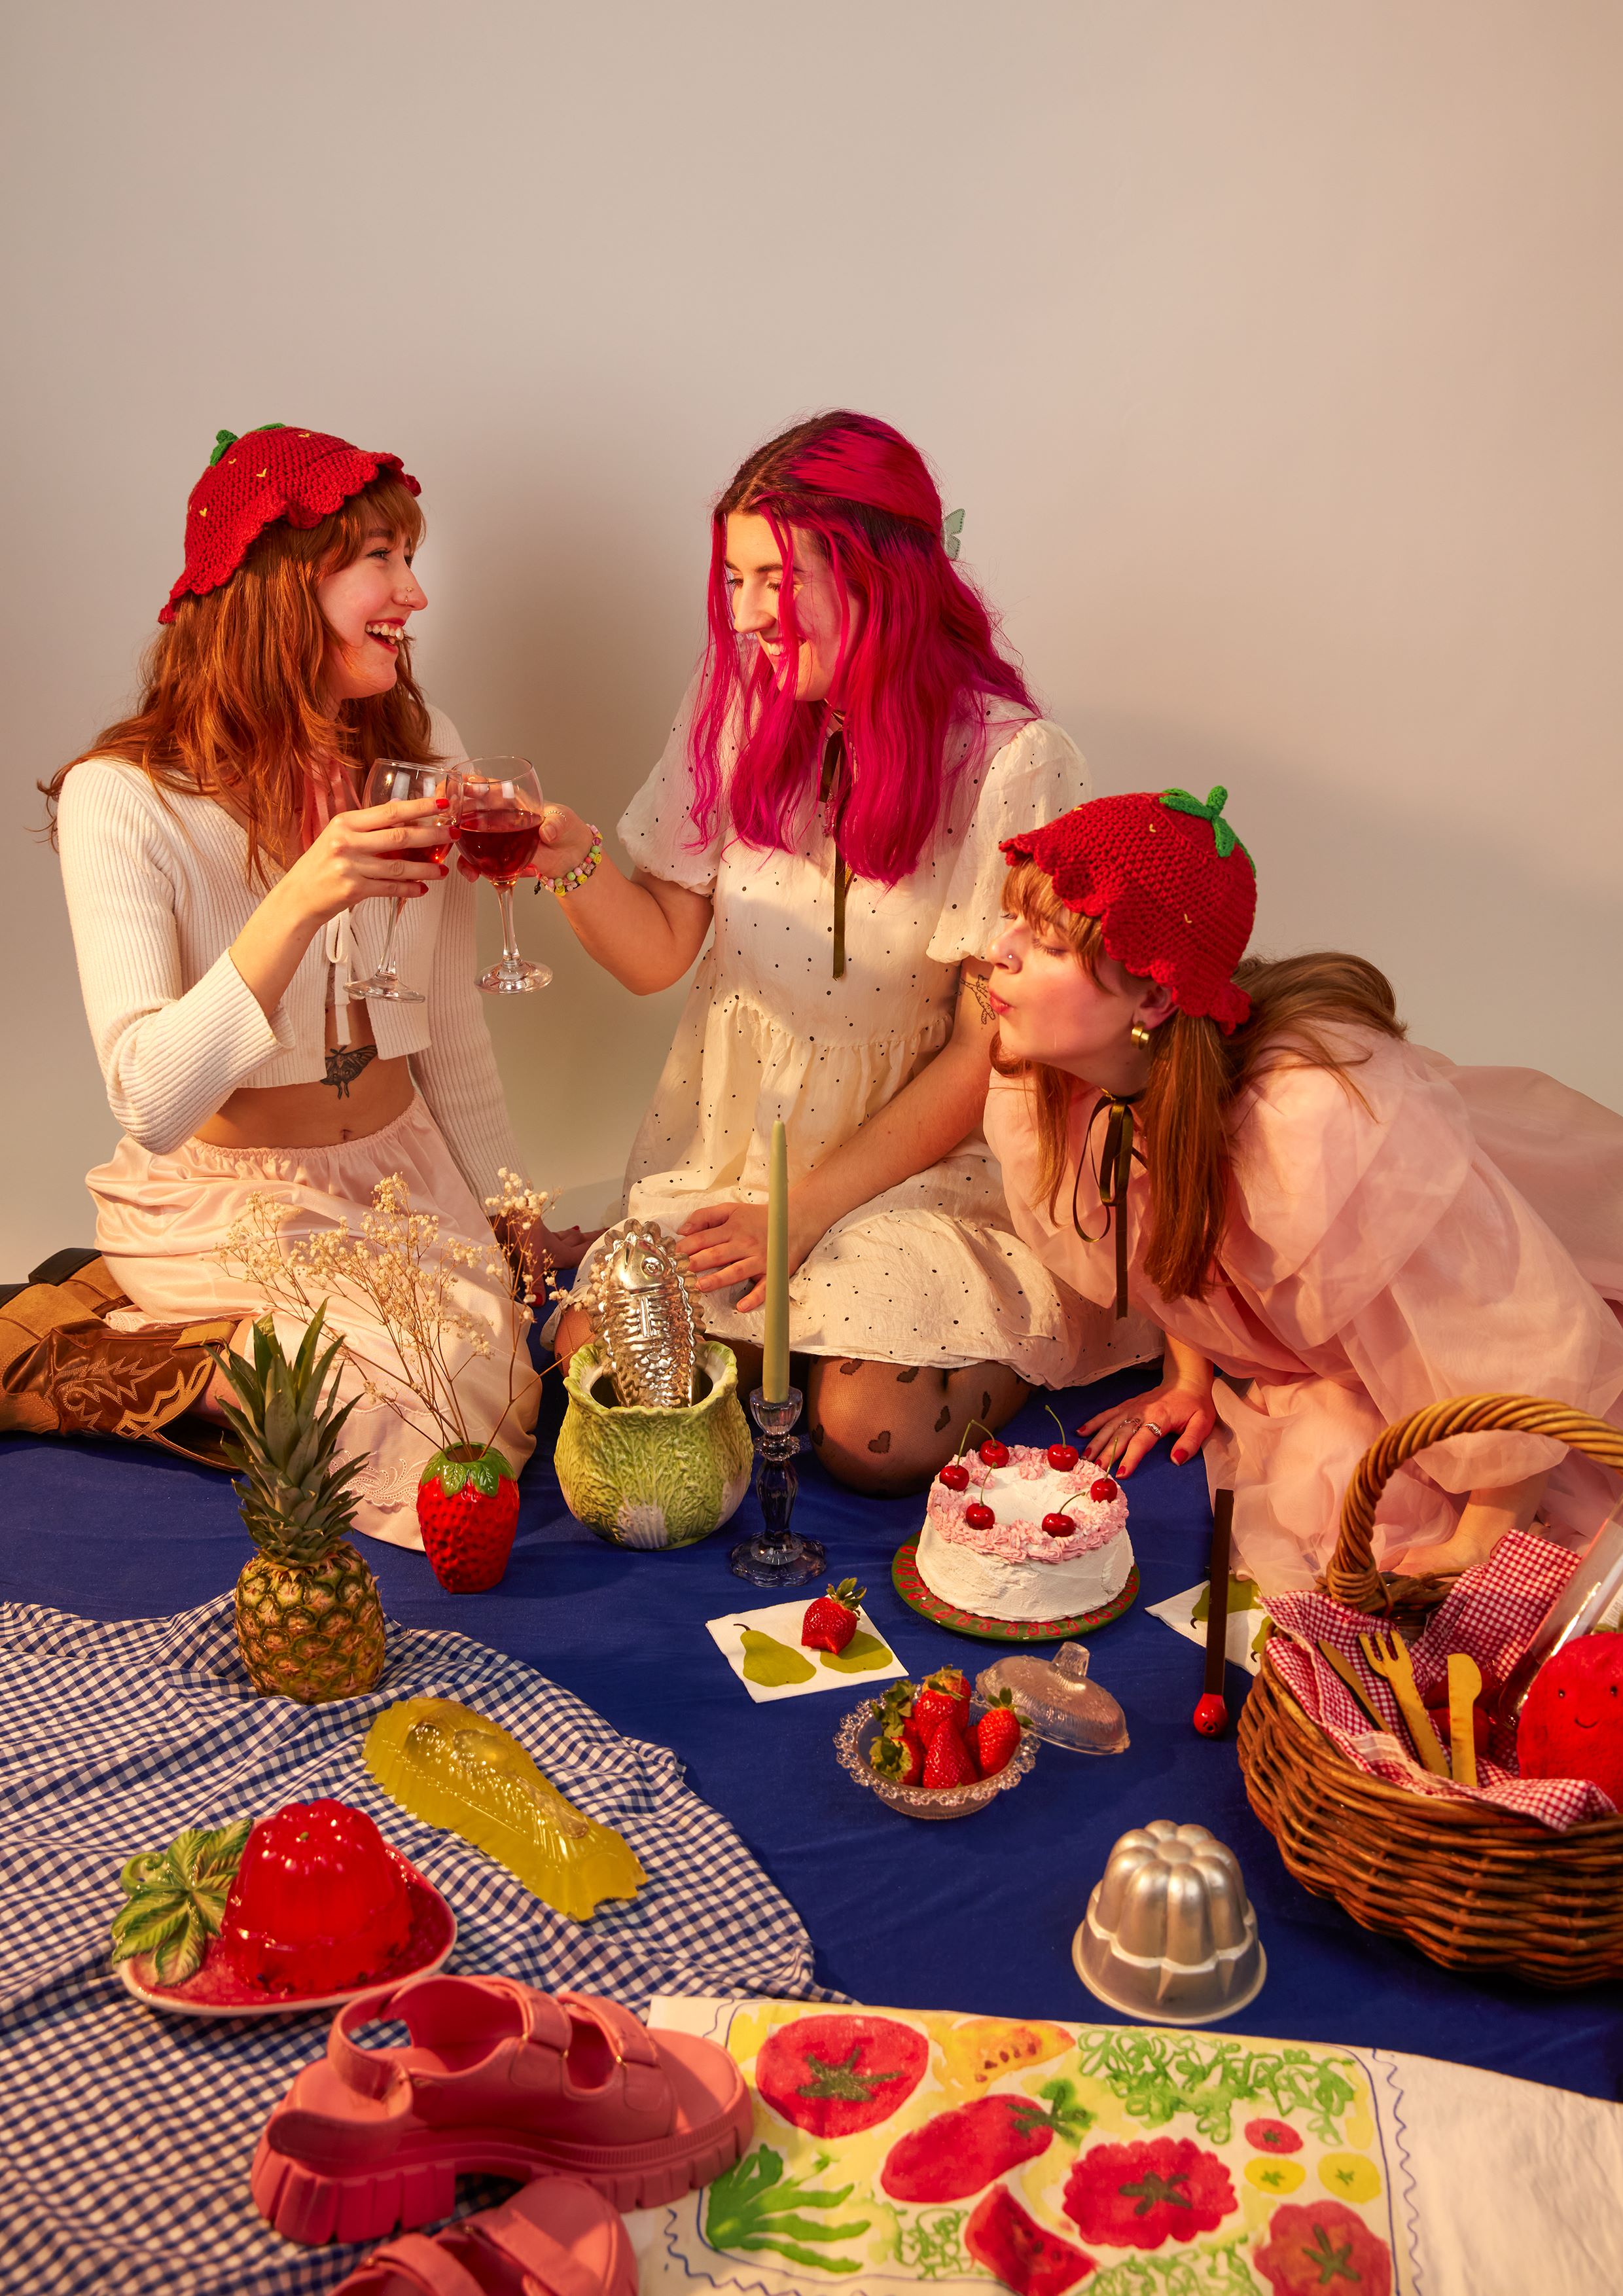 Photoshoot of Laura's strawberry hats in a dreamy picnic scene.